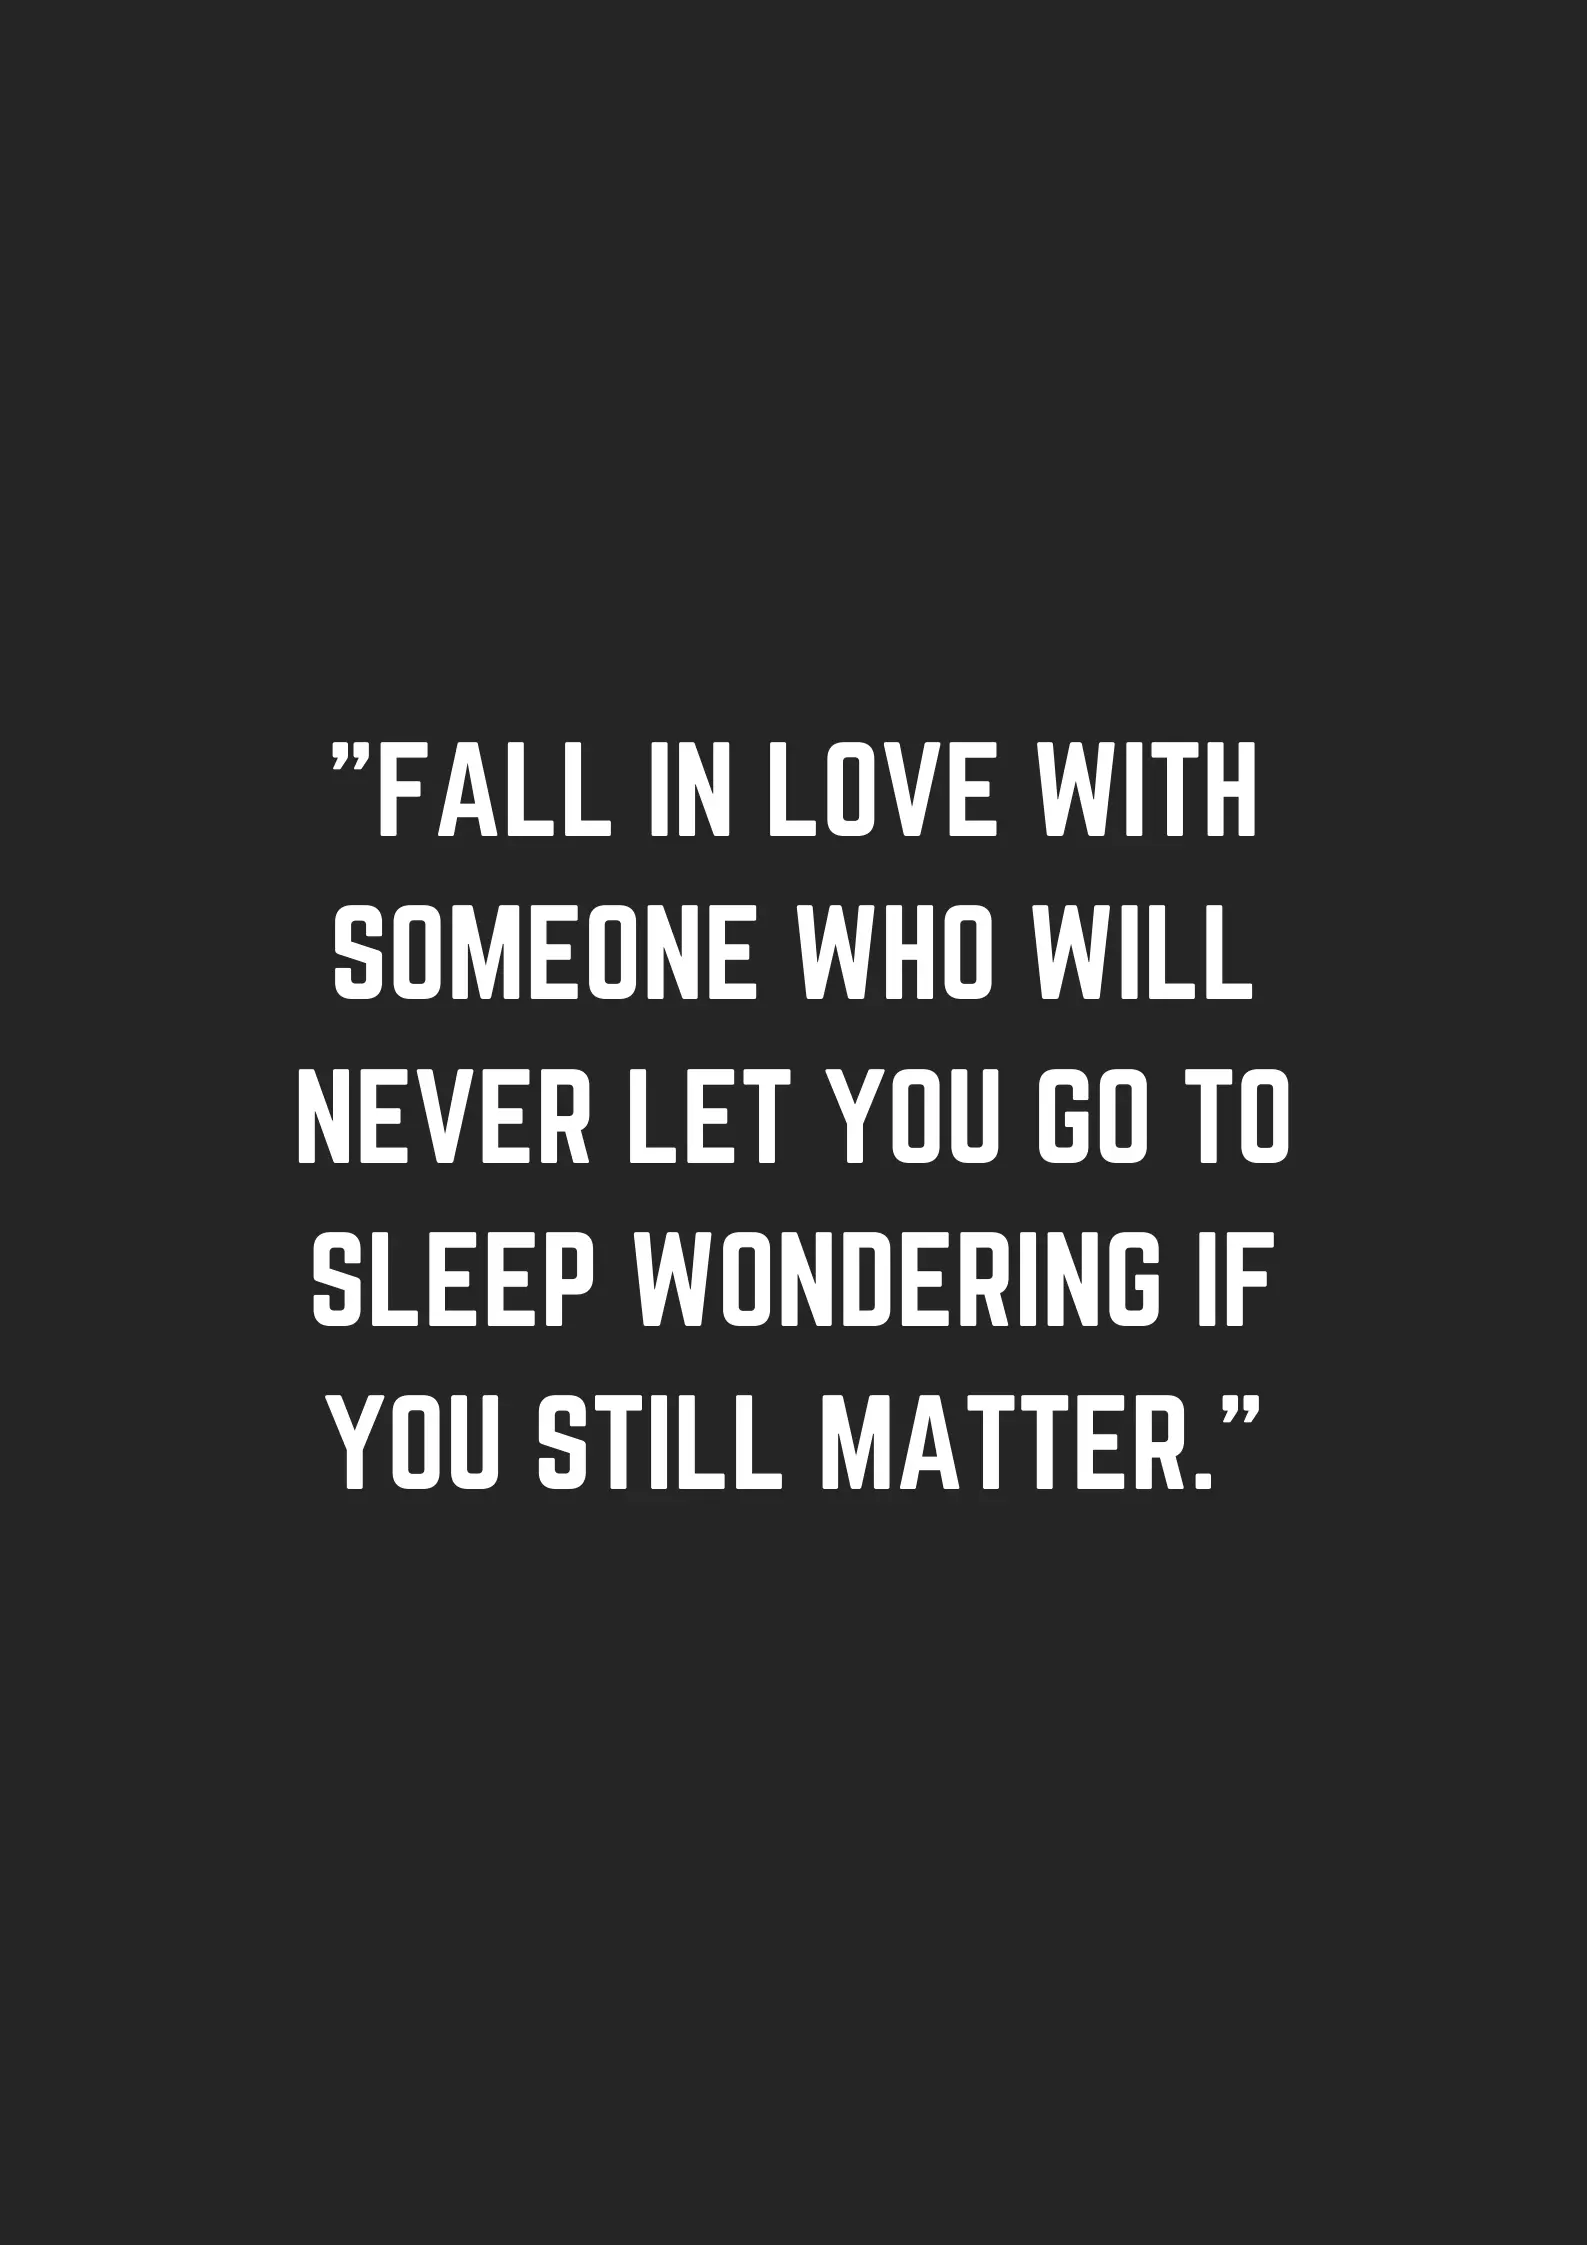 Love Relationships and Self-Love Quotes - museuly